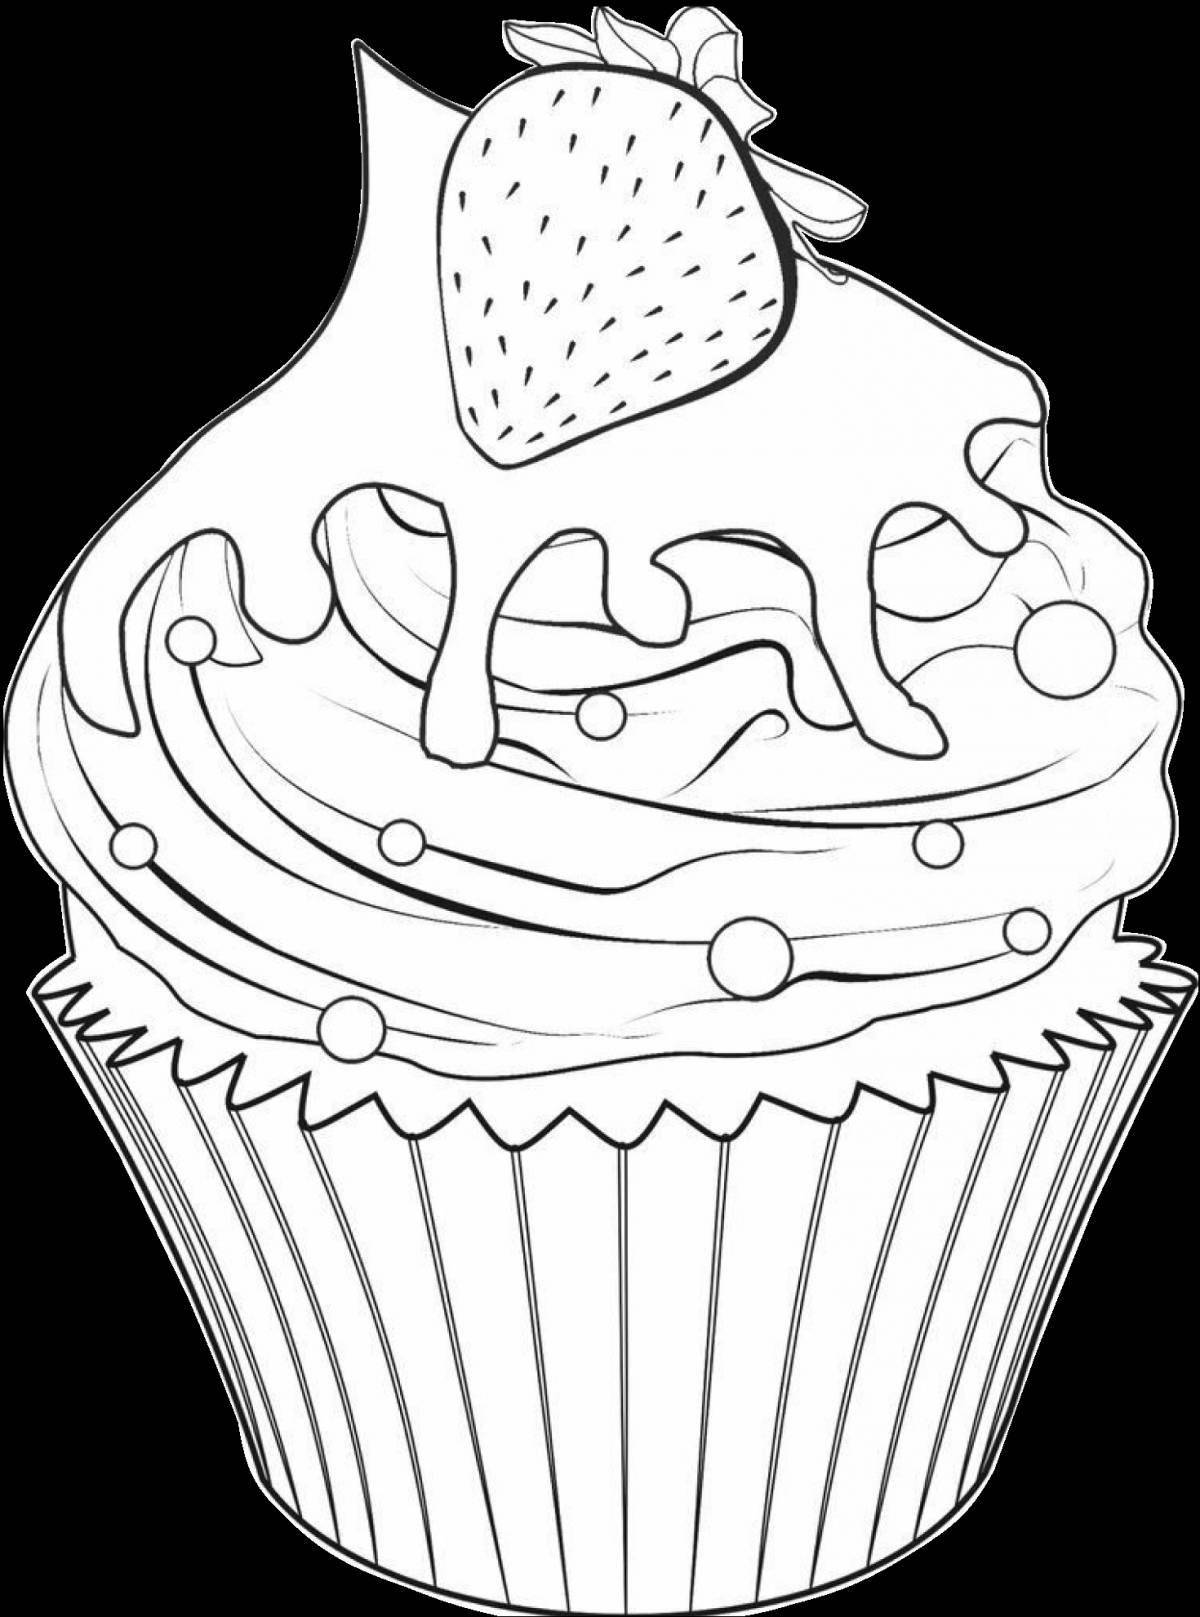 Coloring page funny sweets